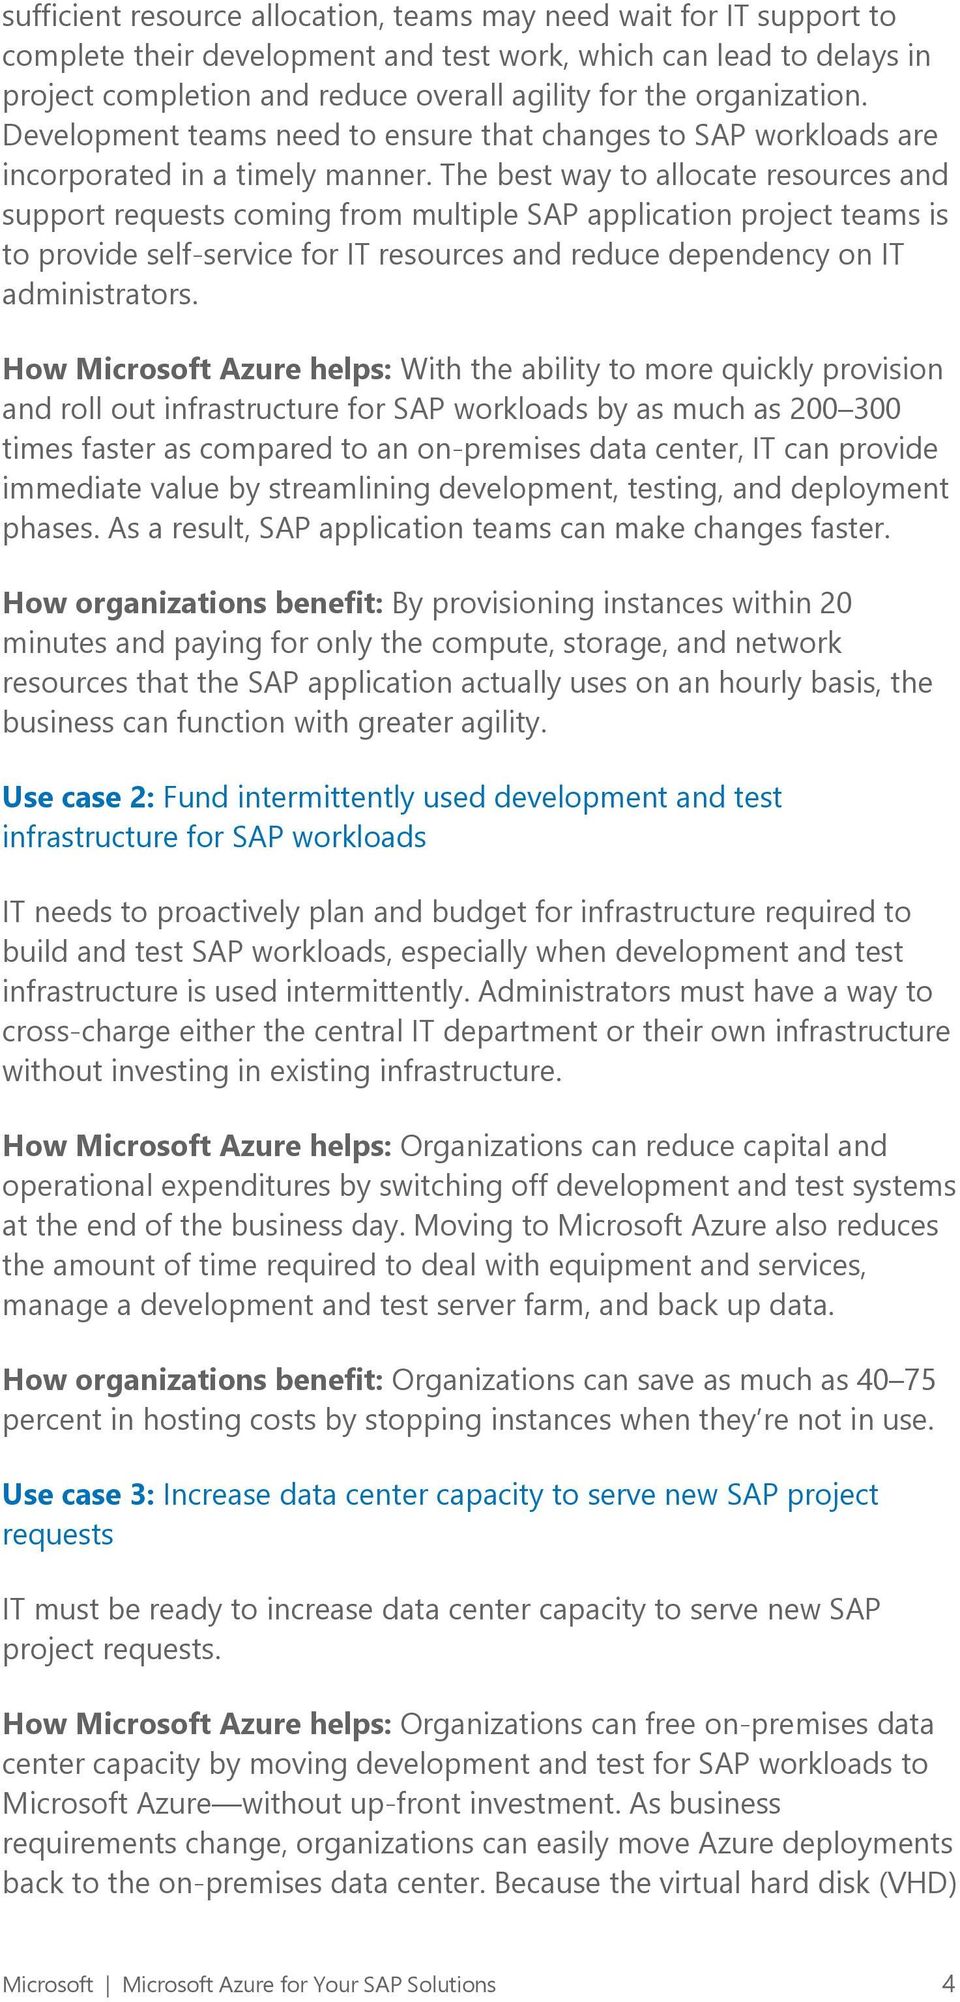 The best way to allocate resources and support requests coming from multiple SAP application project teams is to provide self-service for IT resources and reduce dependency on IT administrators.